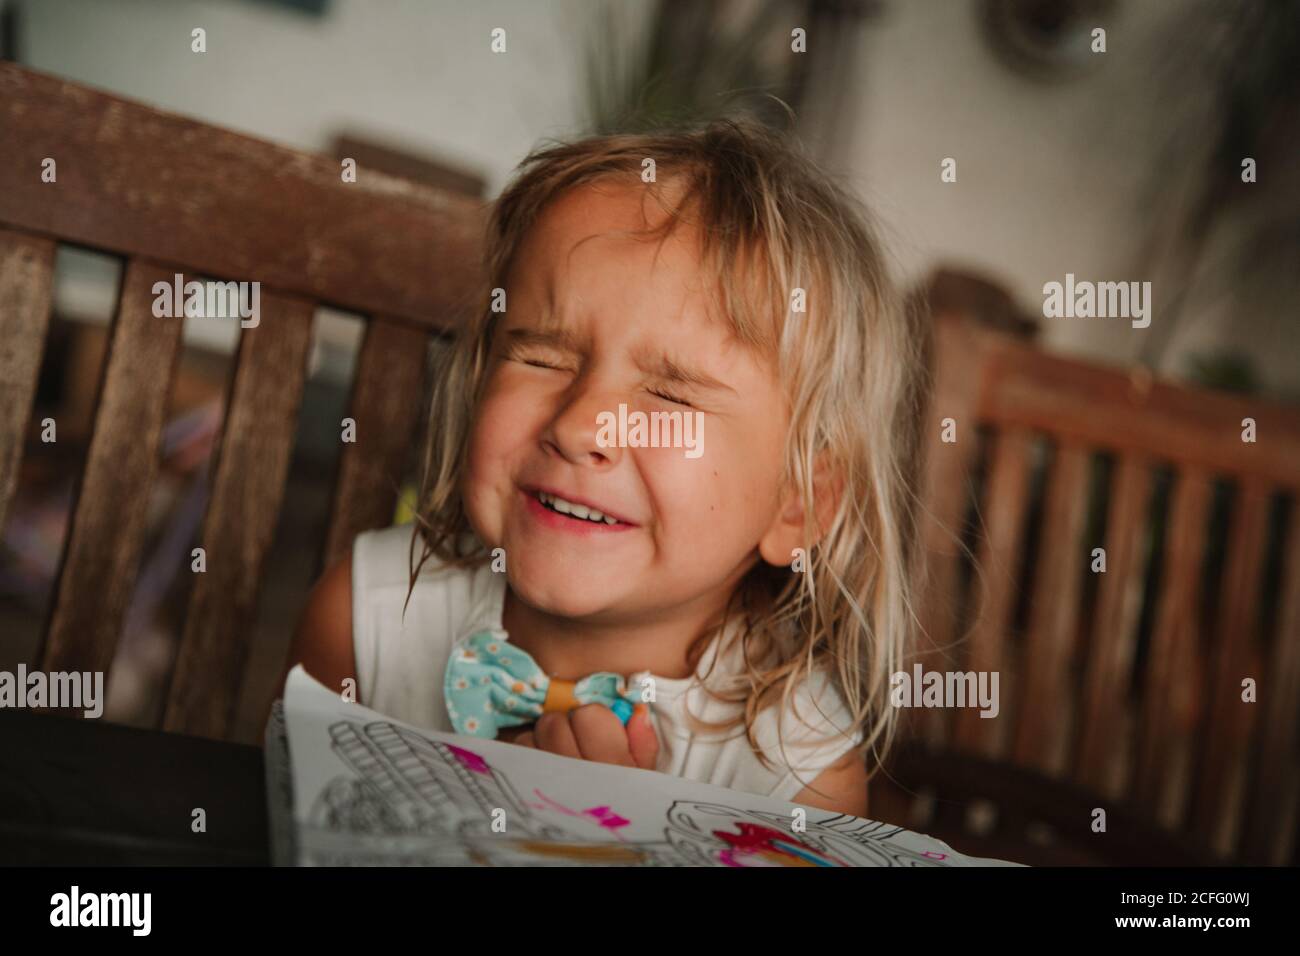 Adorable little girl squinting and smiling while sitting at table with coloring book and waiting for surprise at home Stock Photo